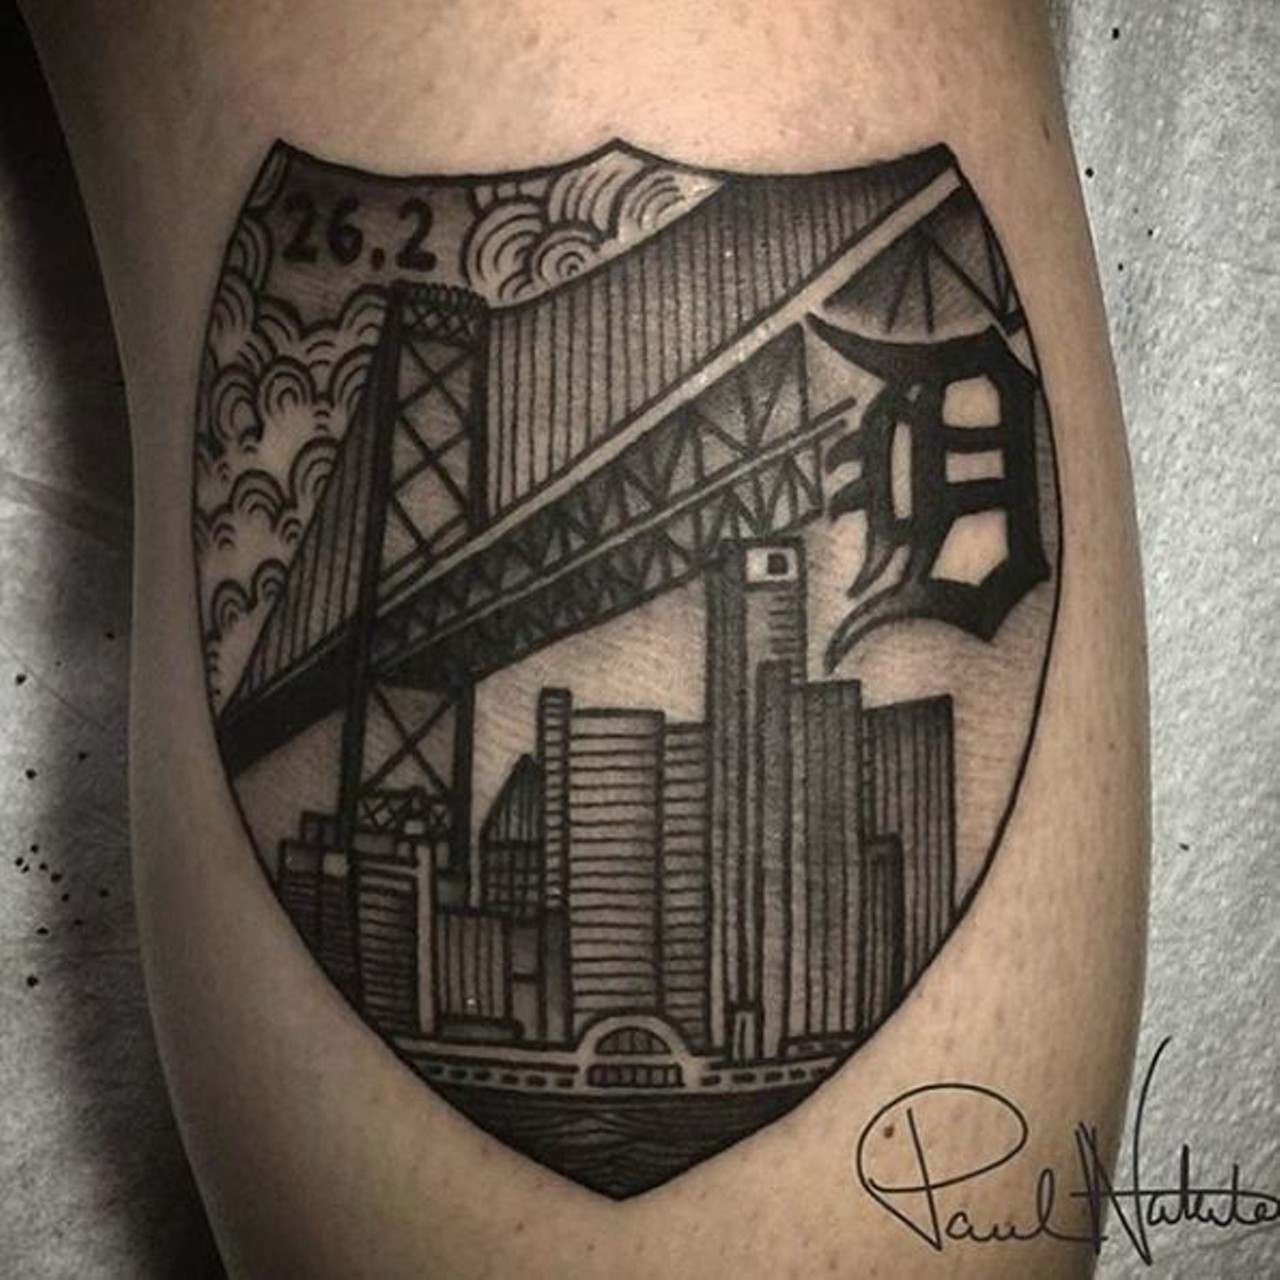 Thought you might like my brother's Detroit-themed tattoo that